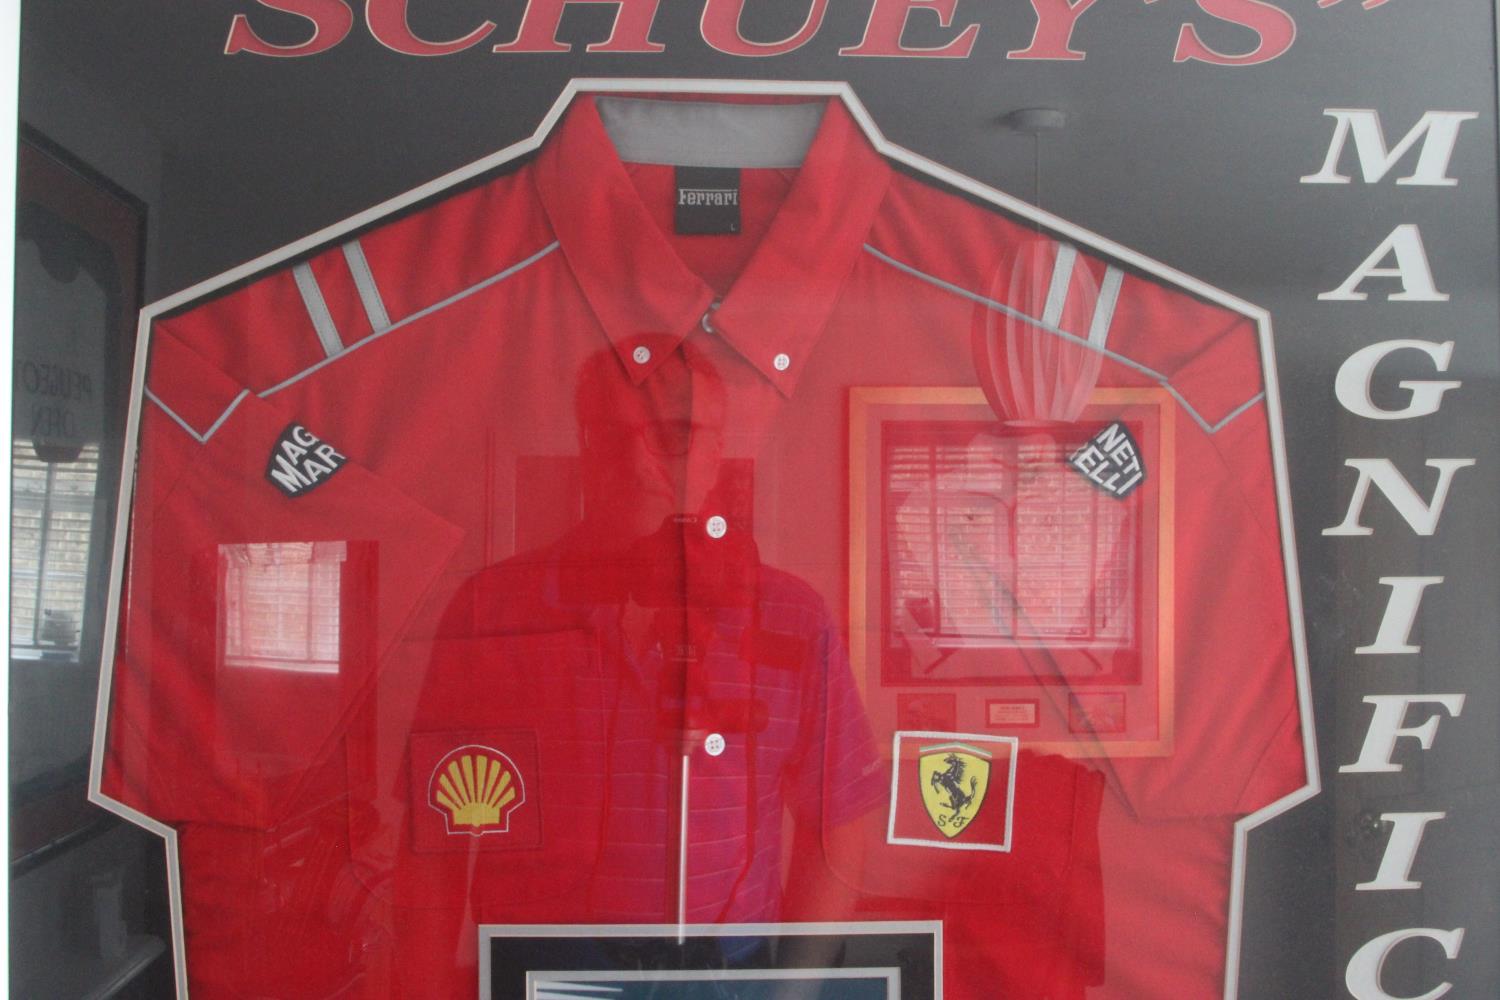 Michael Schumacher signed memorabilia display titled "Schuey's Magnificent 7", commemorating - Image 2 of 4